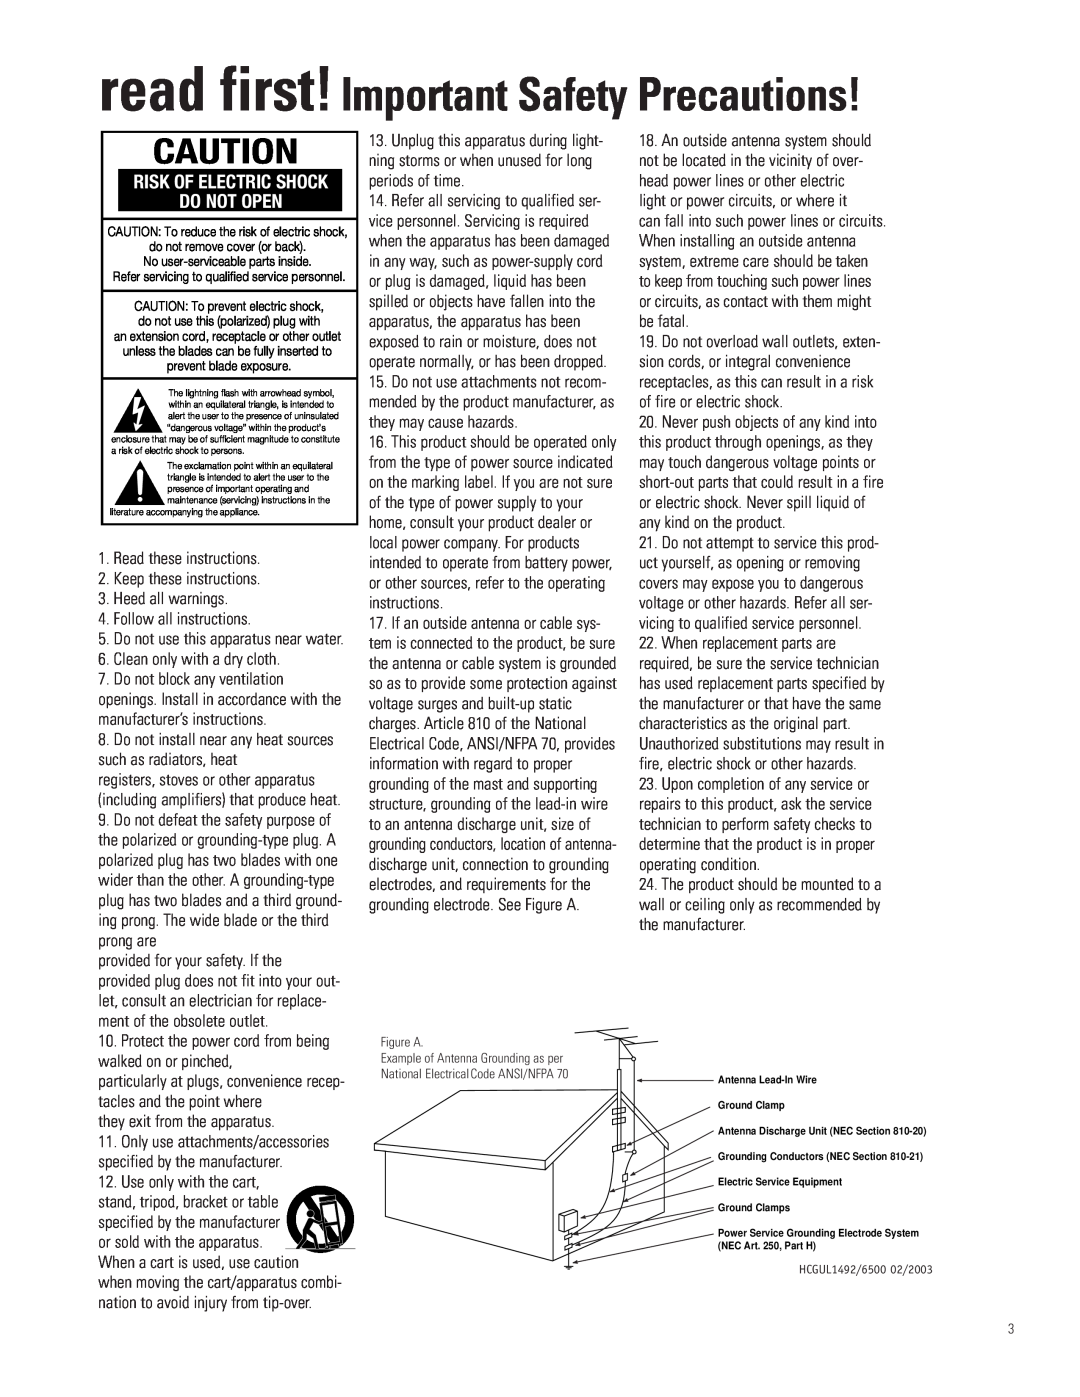 JBL AVR580 manual read first! Important Safety Precautions, Do Not Open, Risk Of Electric Shock 